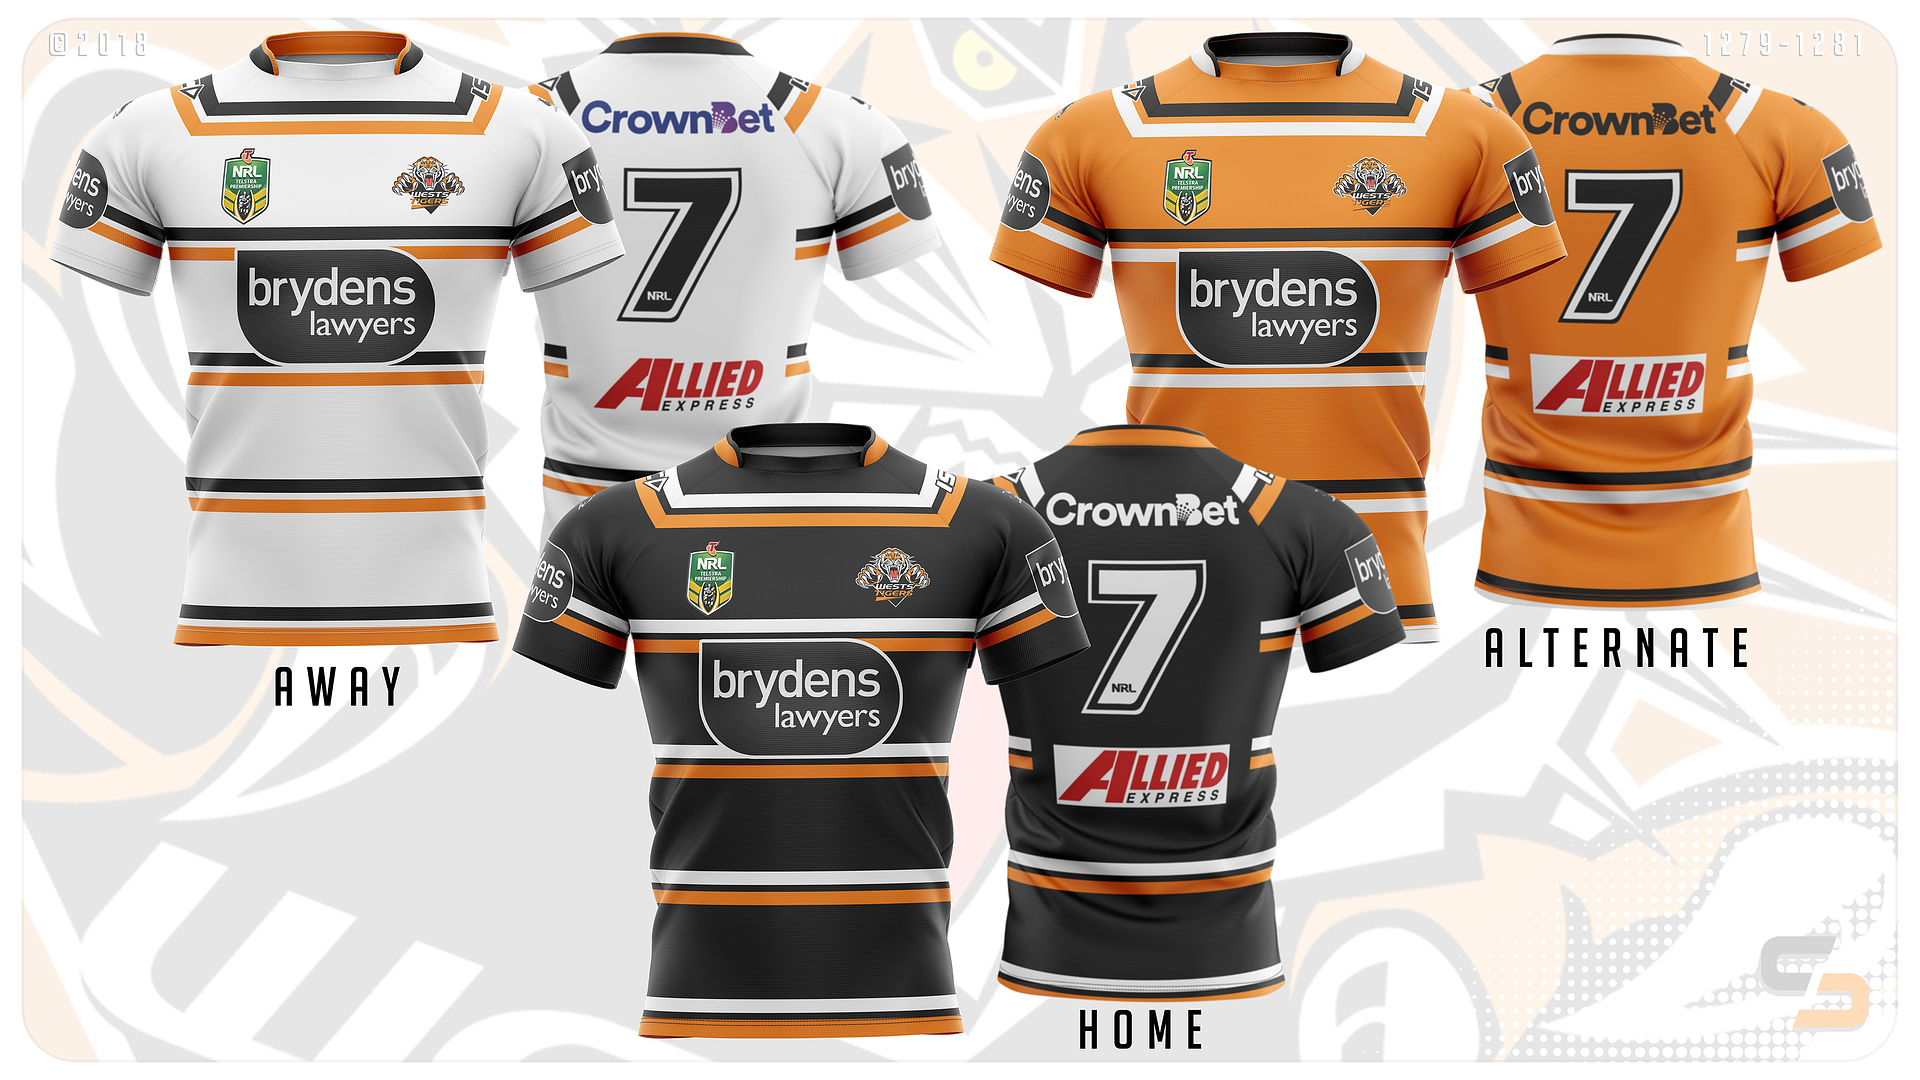 Wests%20Tigers%20Members%20Jersey%202019%20Concepts_zpsyorbyfxw.png